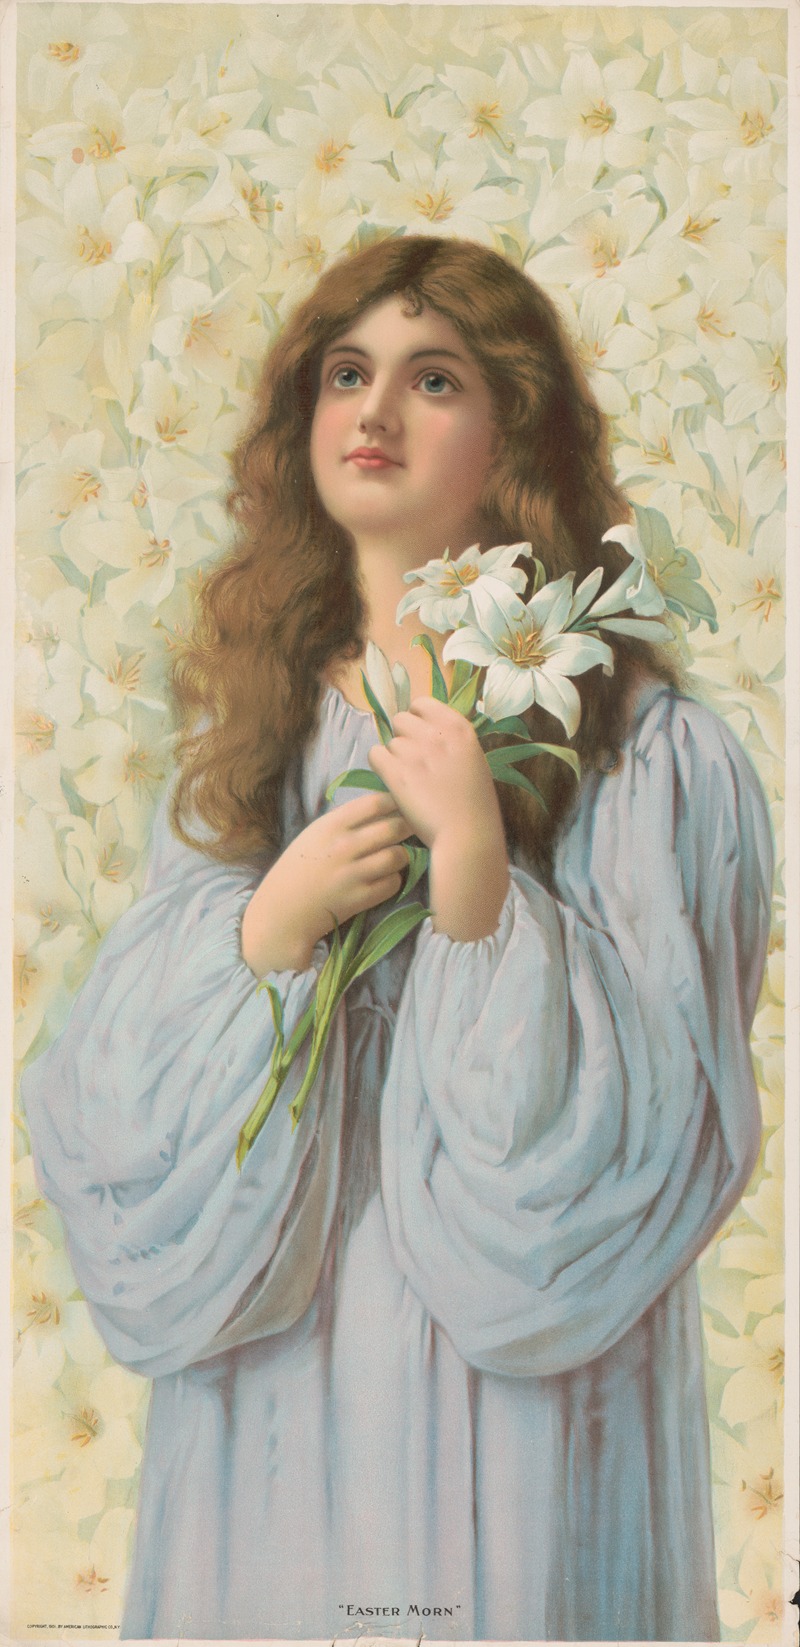 American Lithograph Co. - Easter morn